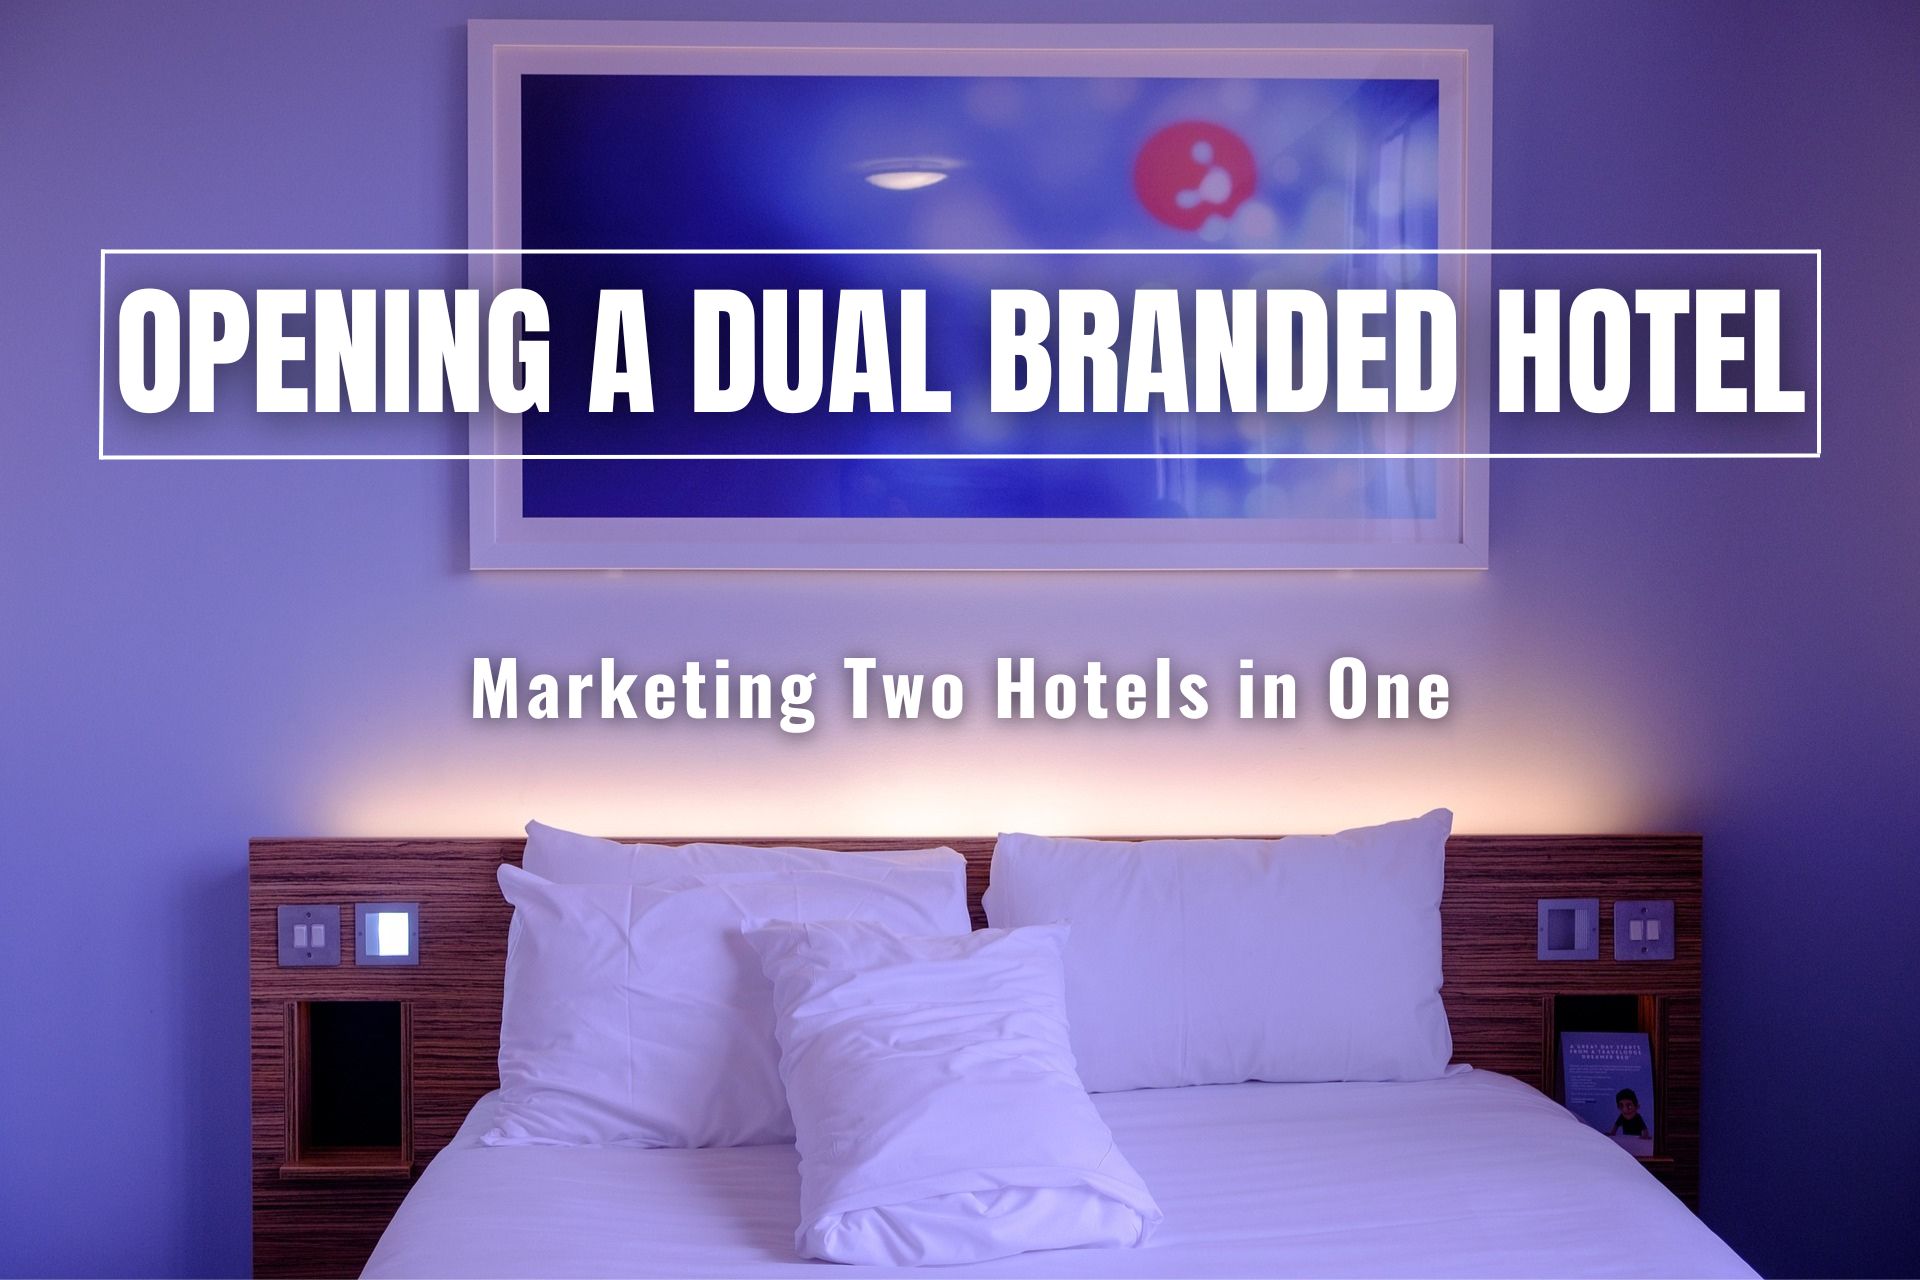 Opening a dual branded hotel